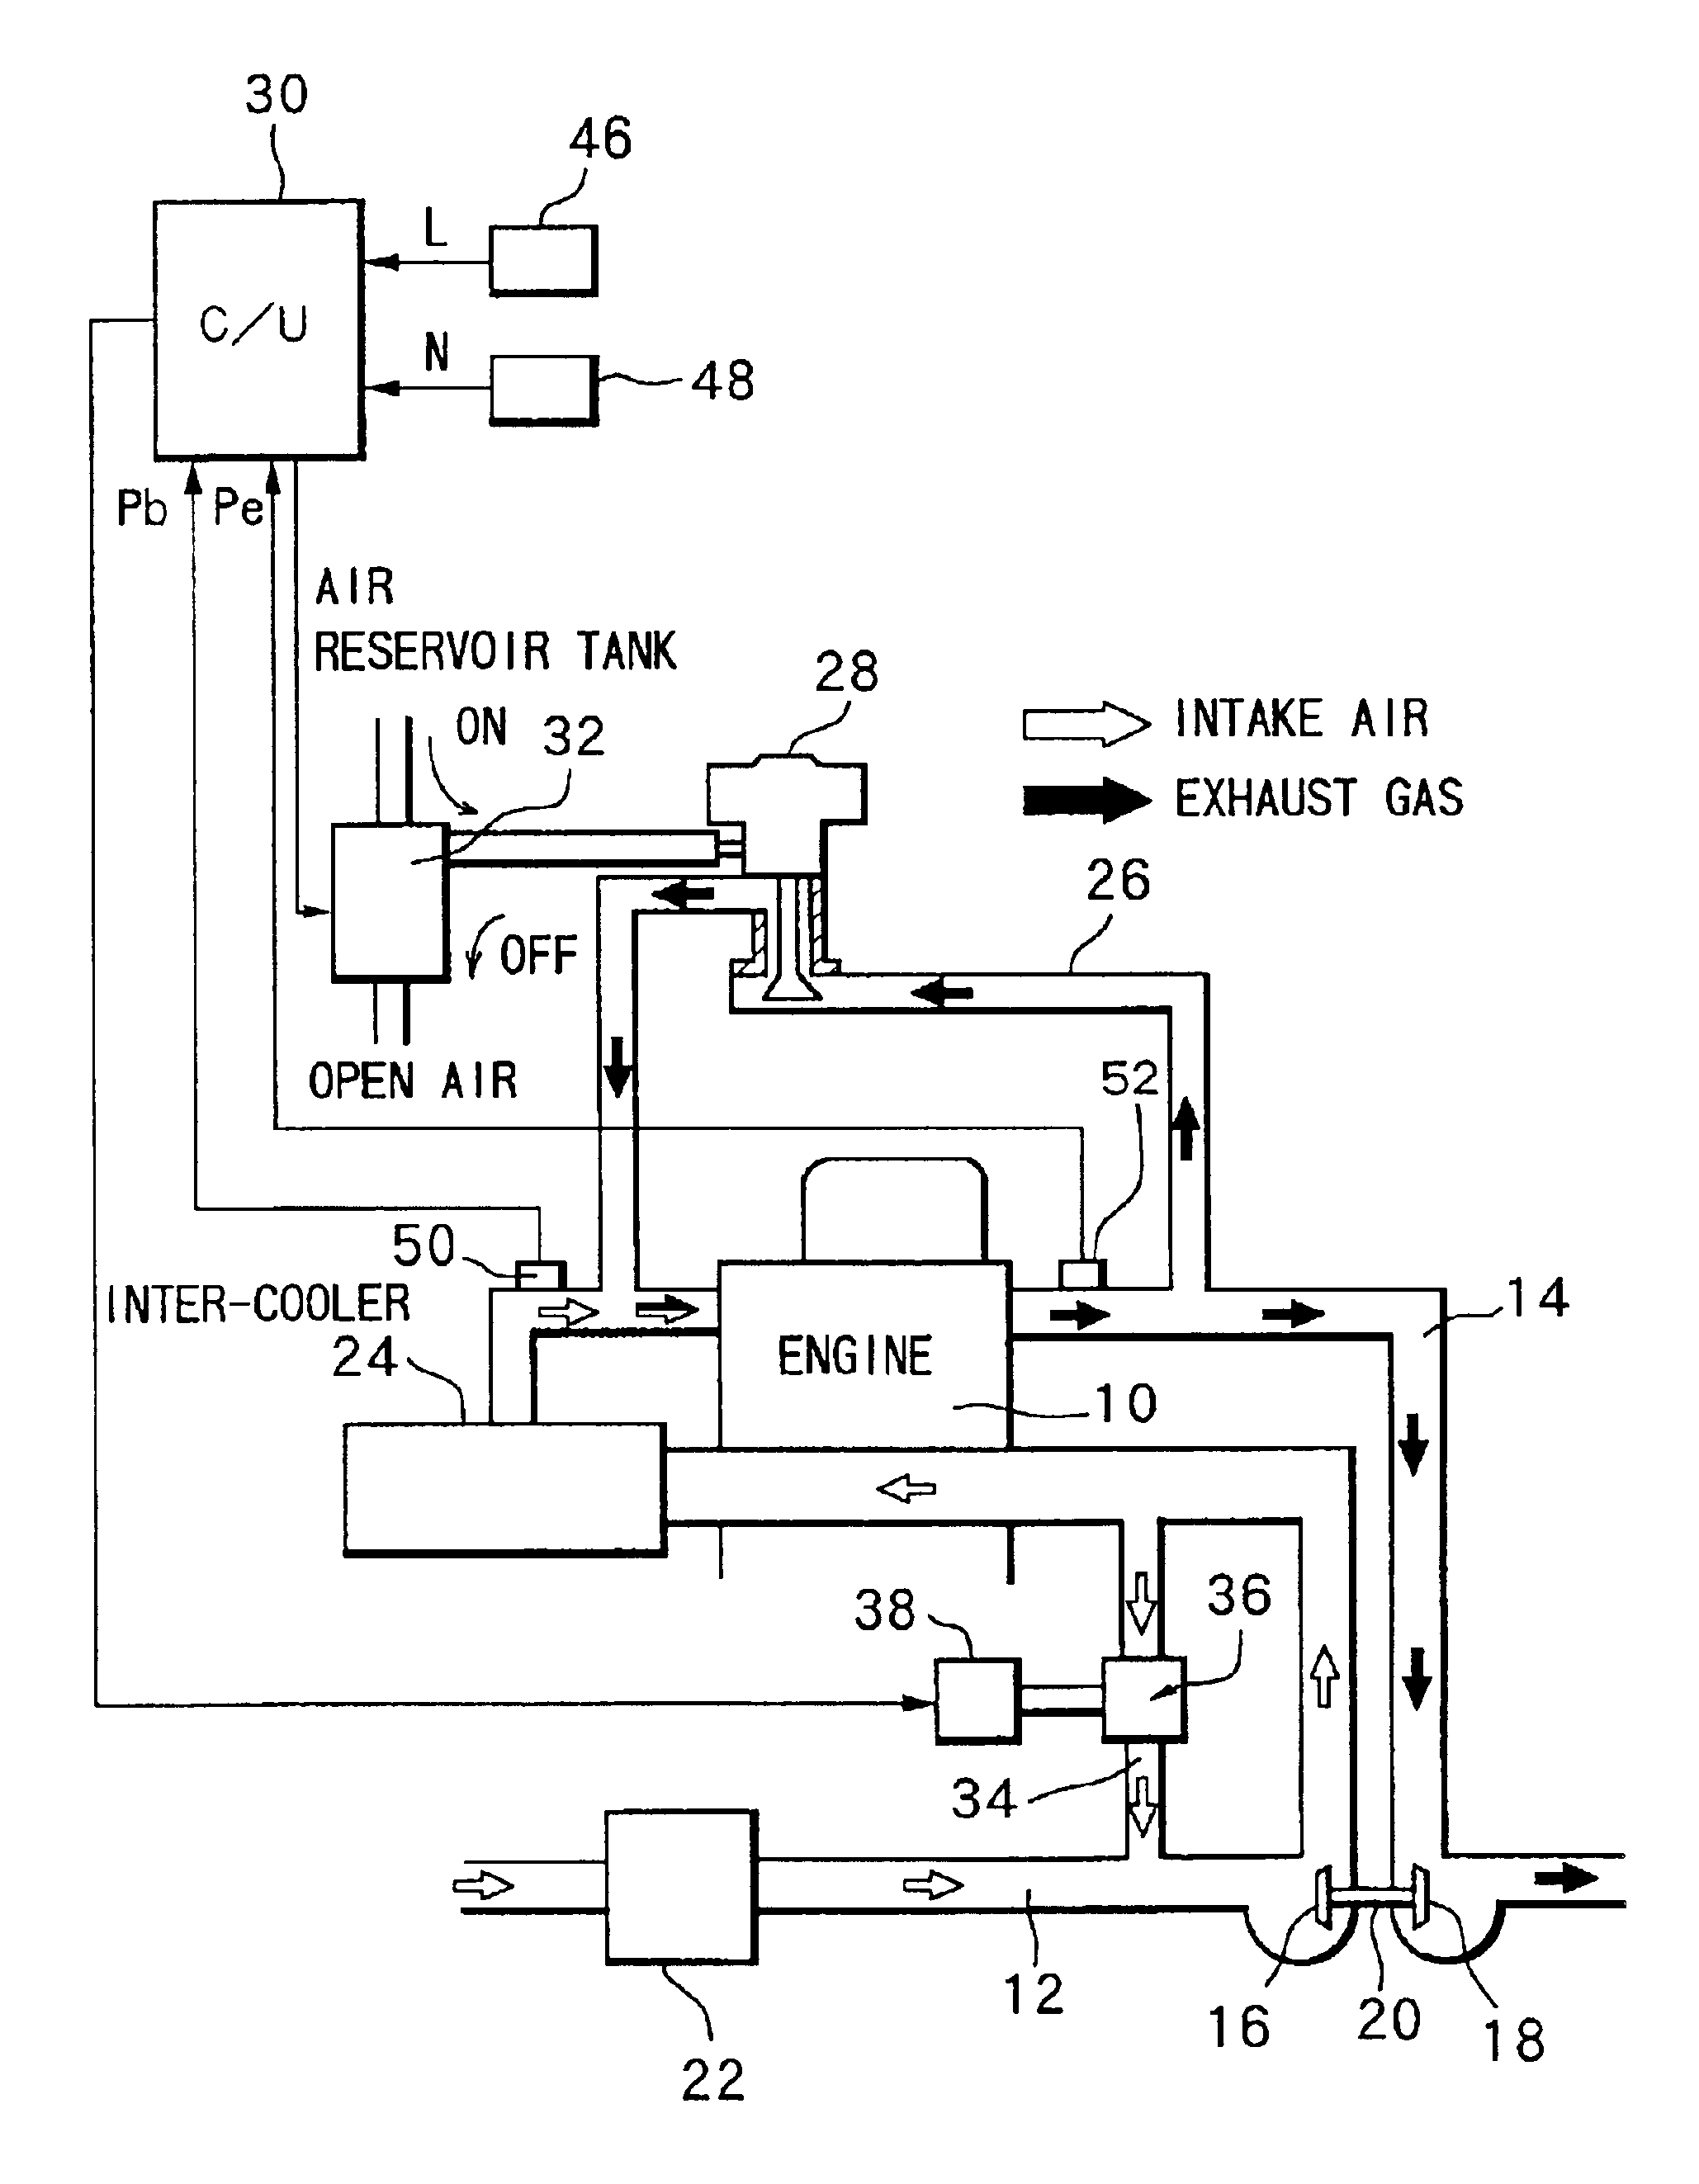 Device and method for exhaust gas circulation of internal combustion engine